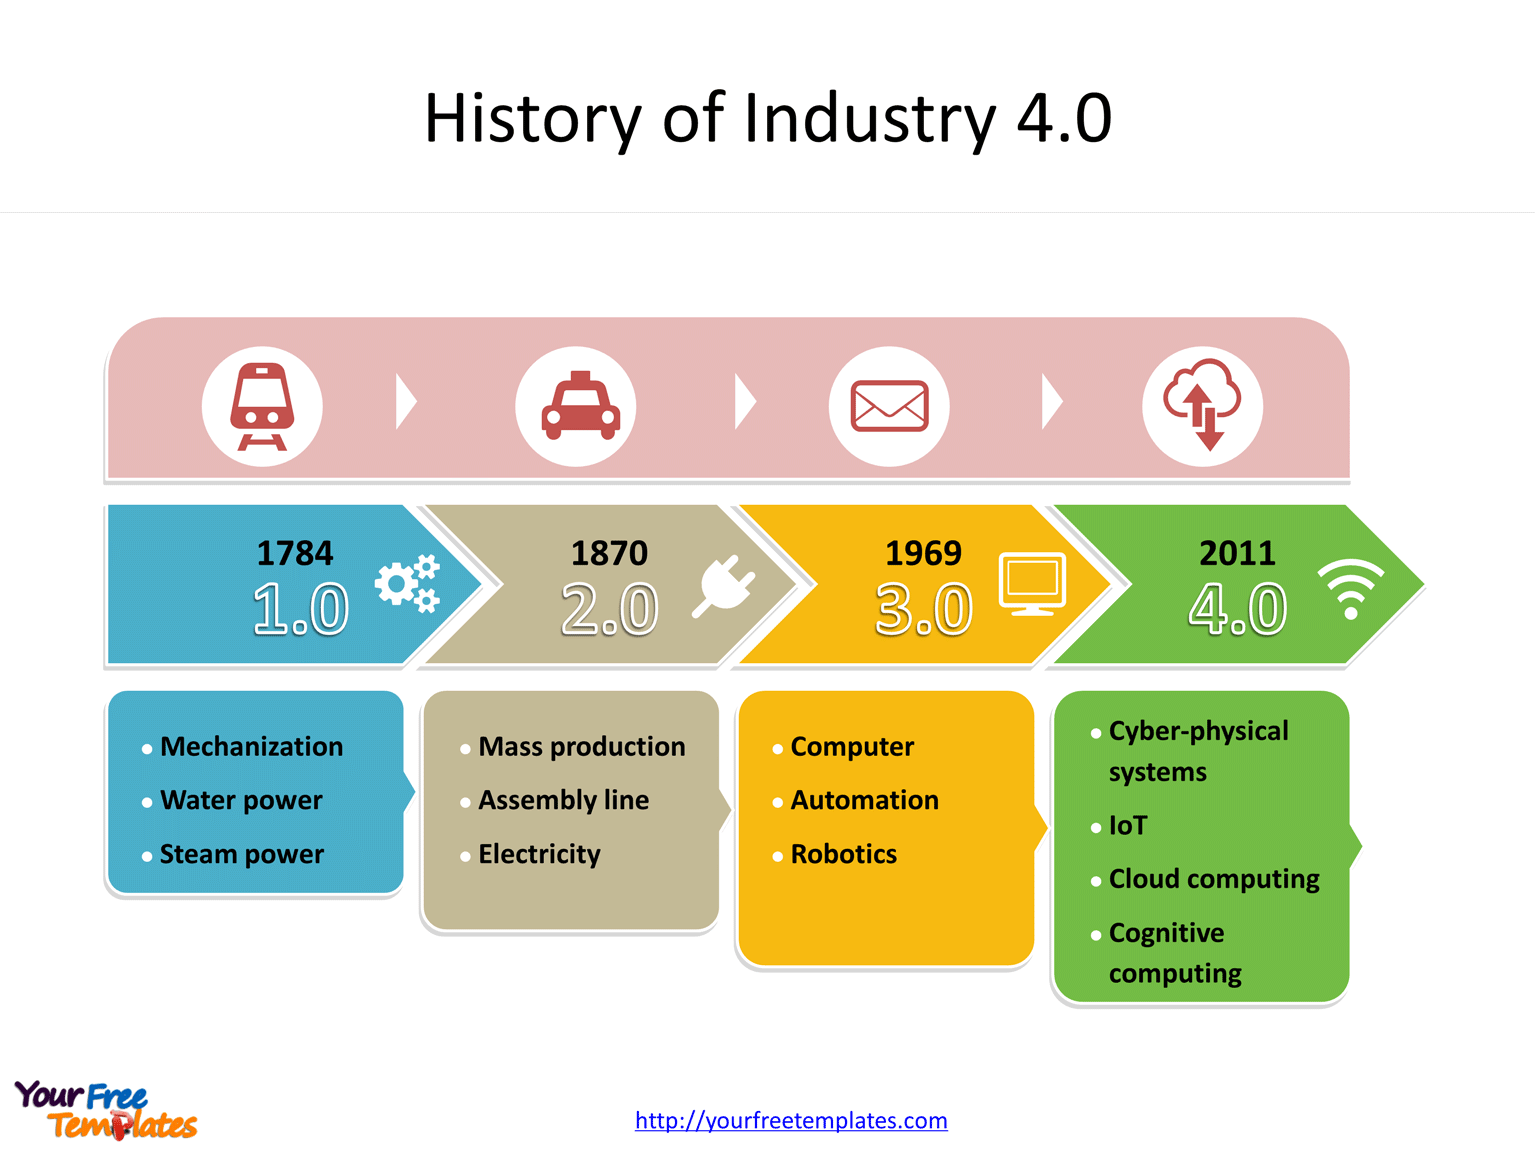 Industry 4.0 is an abstract and complex term consisting of many components when looking closely into our society and current digital trends.